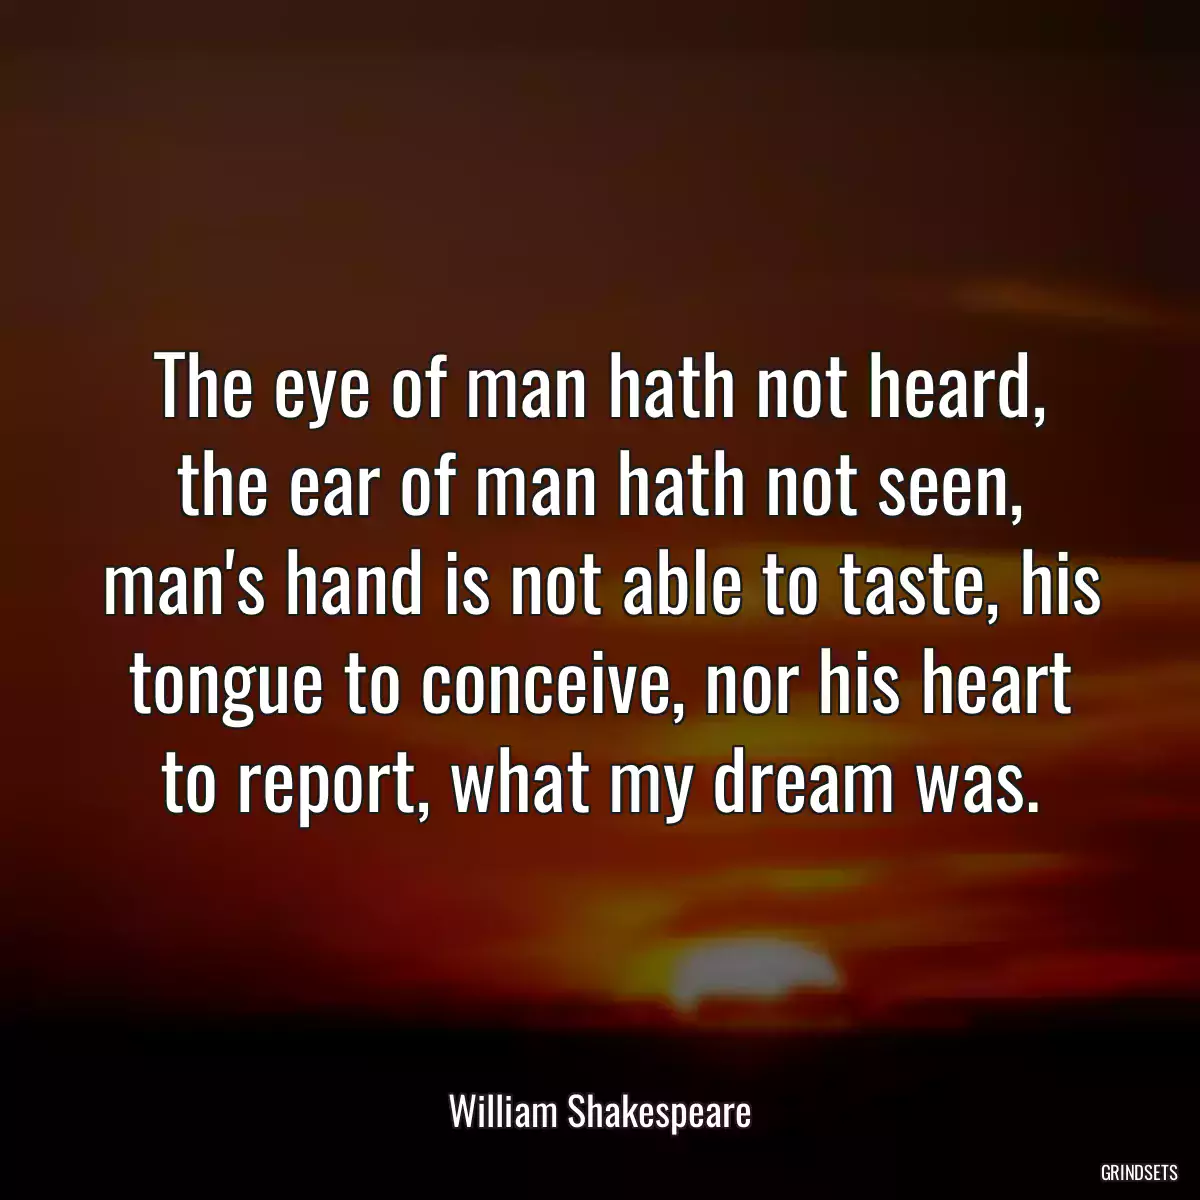 The eye of man hath not heard, the ear of man hath not seen, man\'s hand is not able to taste, his tongue to conceive, nor his heart to report, what my dream was.